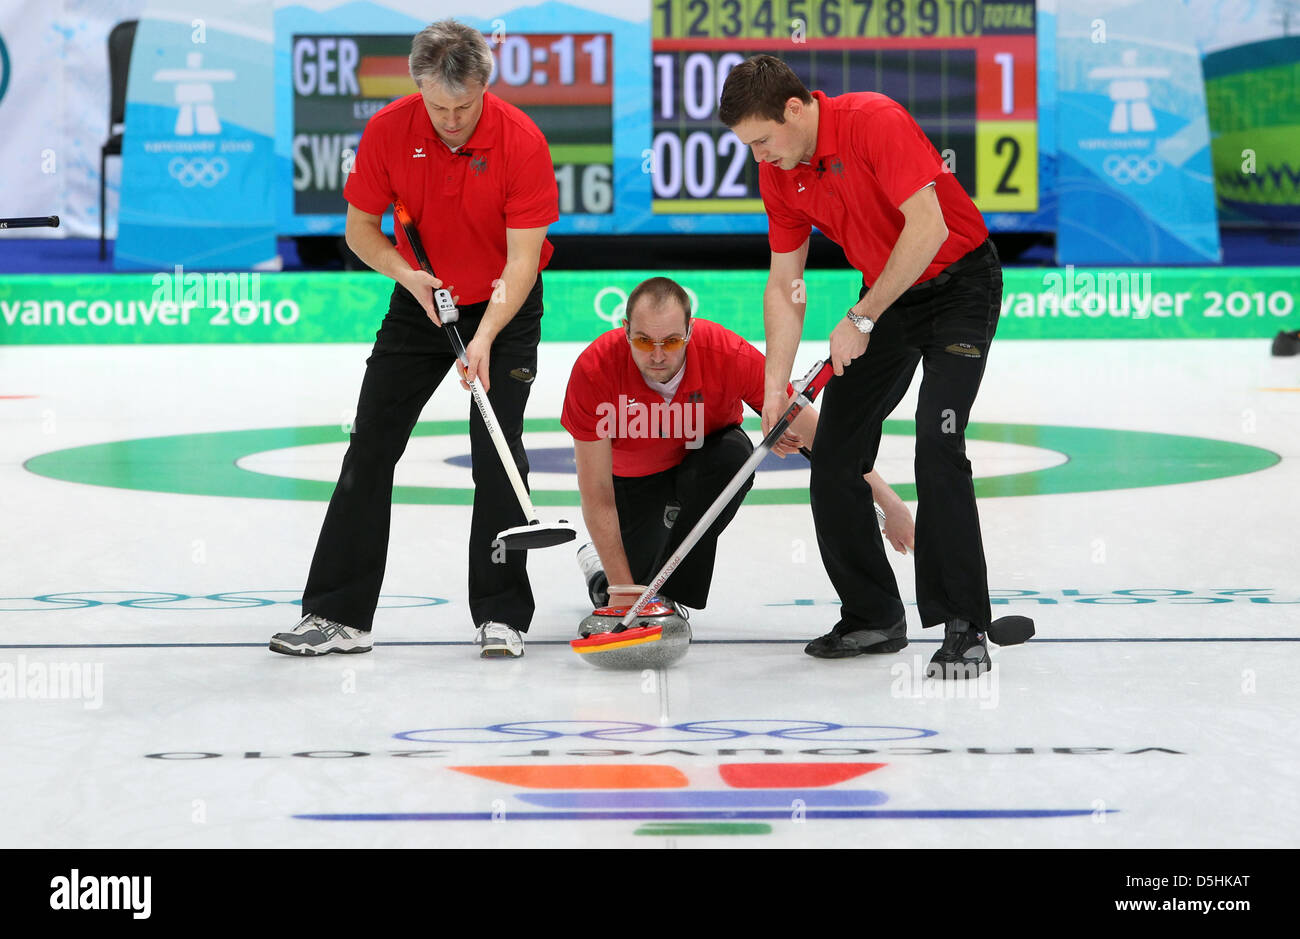 Holger Hoehne (C) of Germany releases his stone as Andreas Kempf (L) and Andy Lang guide it during Curling men's round robin session 3 at the Olympic Center during the Vancouver 2010 Olympic Games in Vancouver, Canada 17 February 2010. Germany's opponent was Sweden. Photo: Daniel Karmann Stock Photo